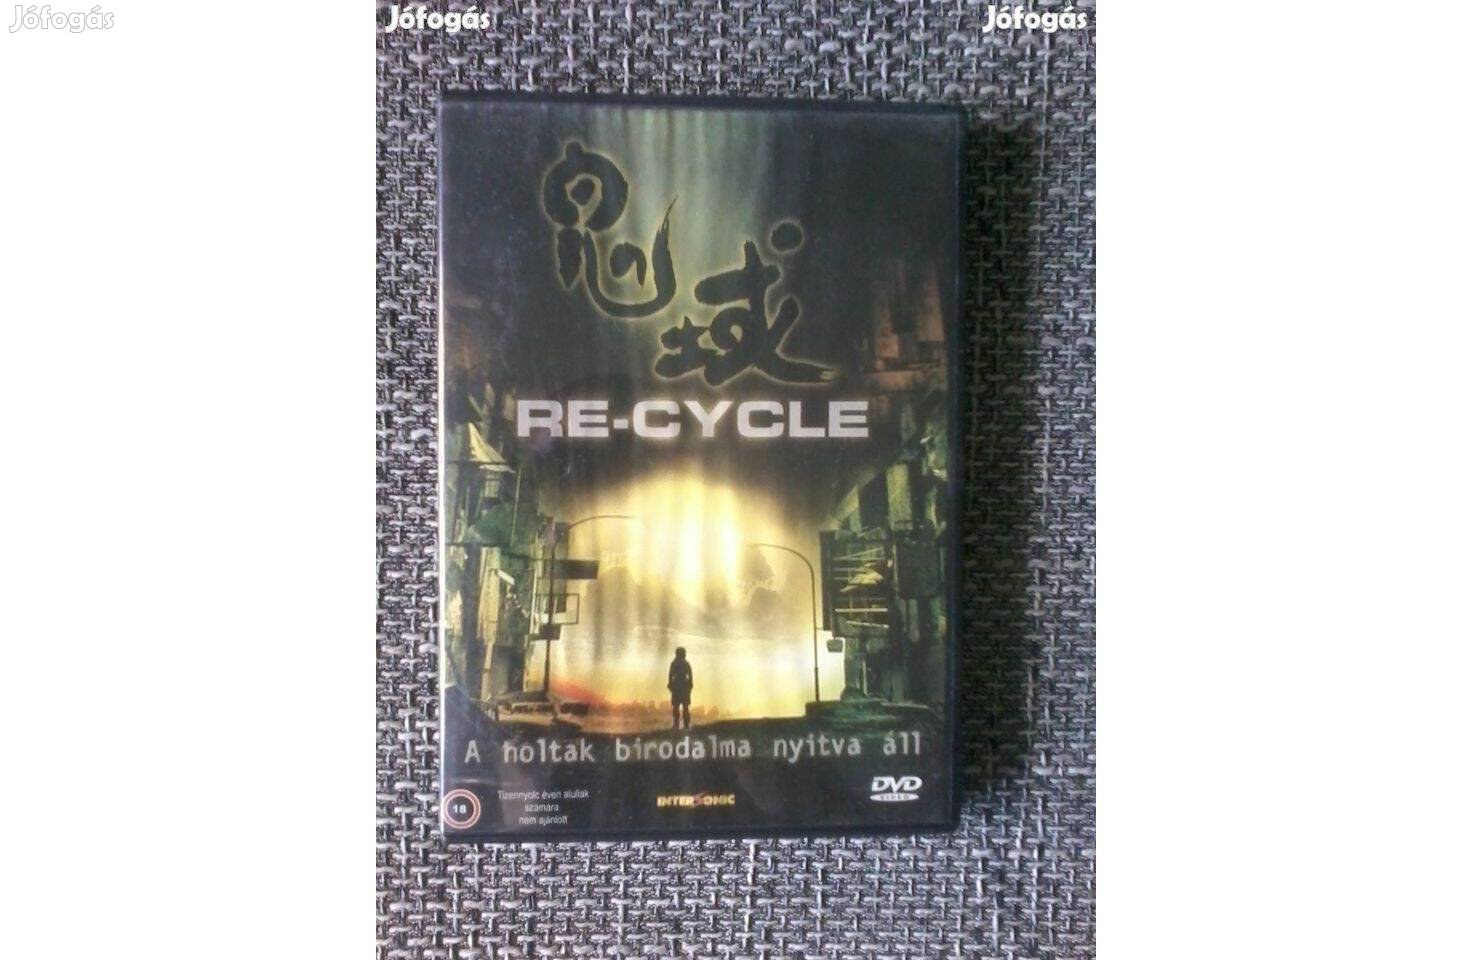 Re-Cycle DVD